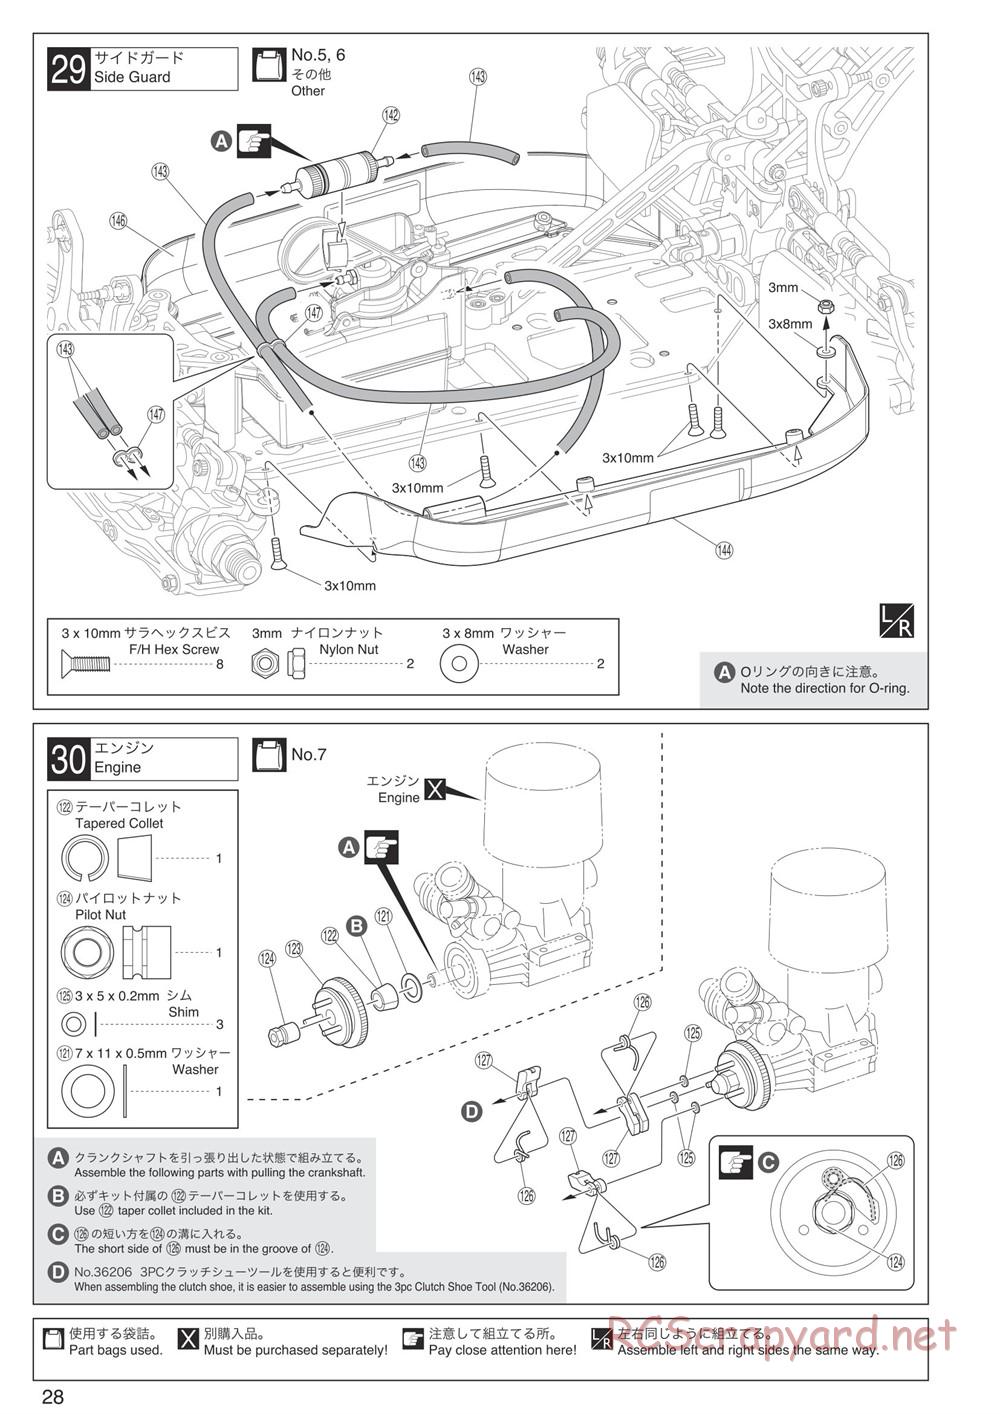 Kyosho - Inferno MP9 TKI4 10th Anniversary Special Edition - Manual - Page 28